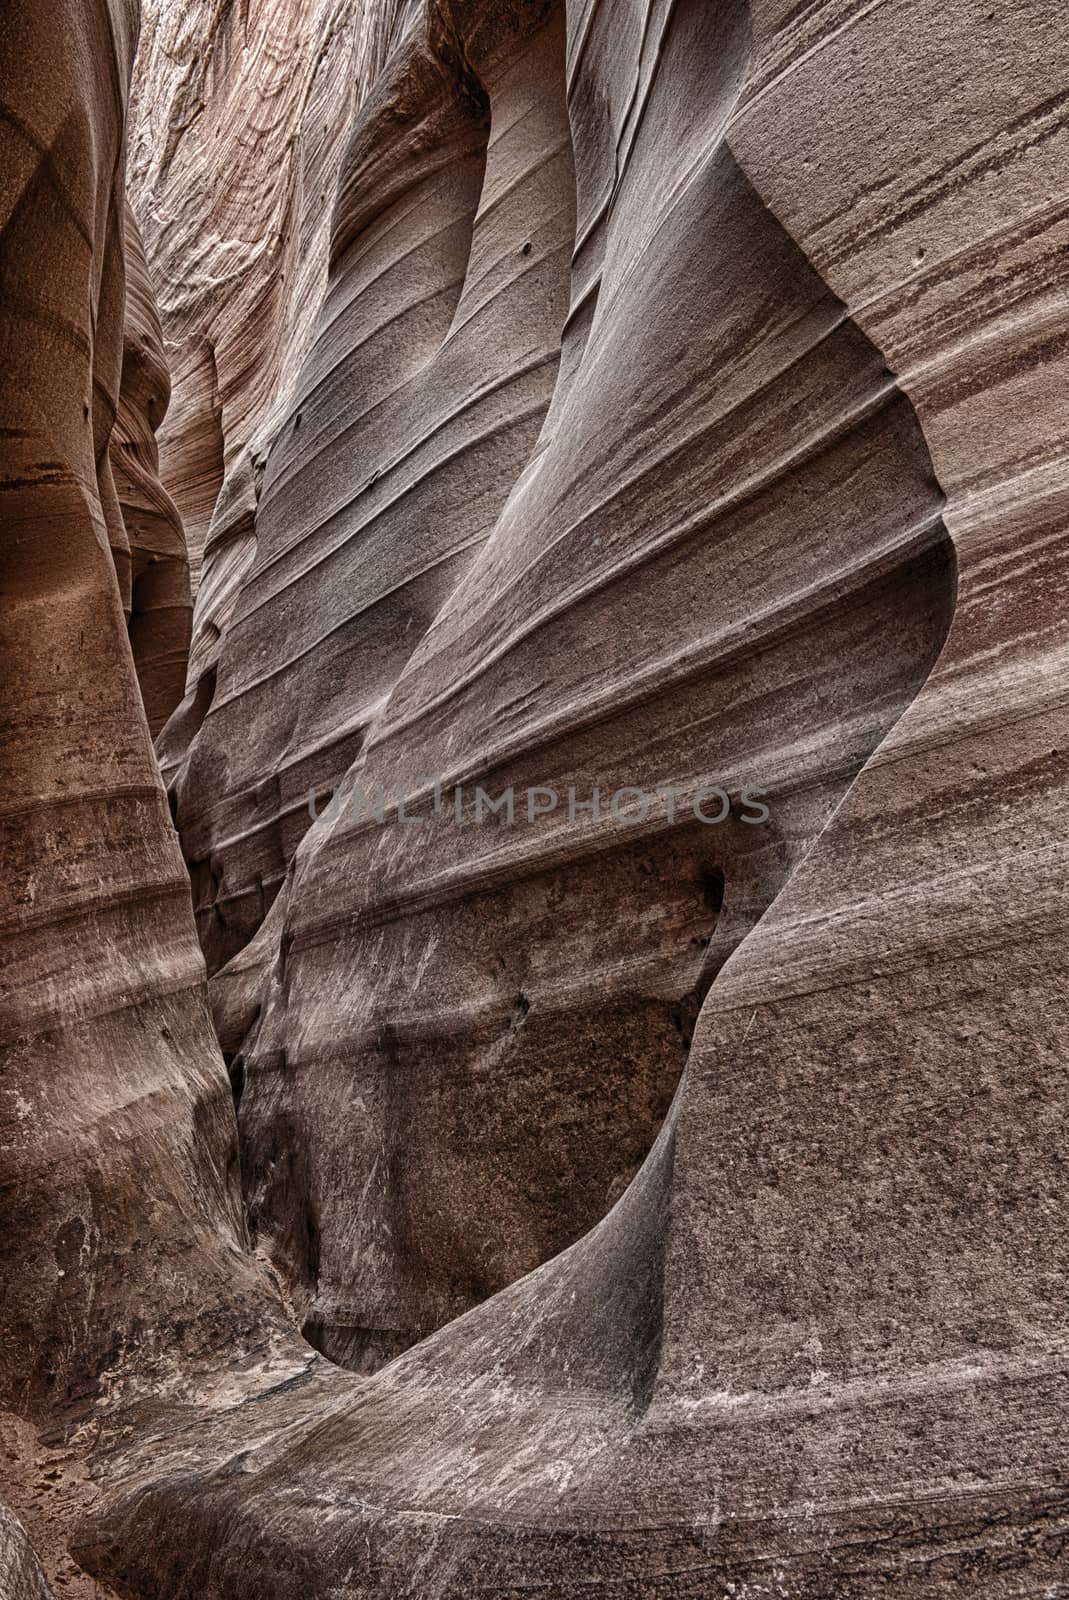 Narrow gorge leading to Zebra Canyon. The awsome zig-zag shapes were created by water. Grand Staircase-Escalante National Monument, Utah. USA